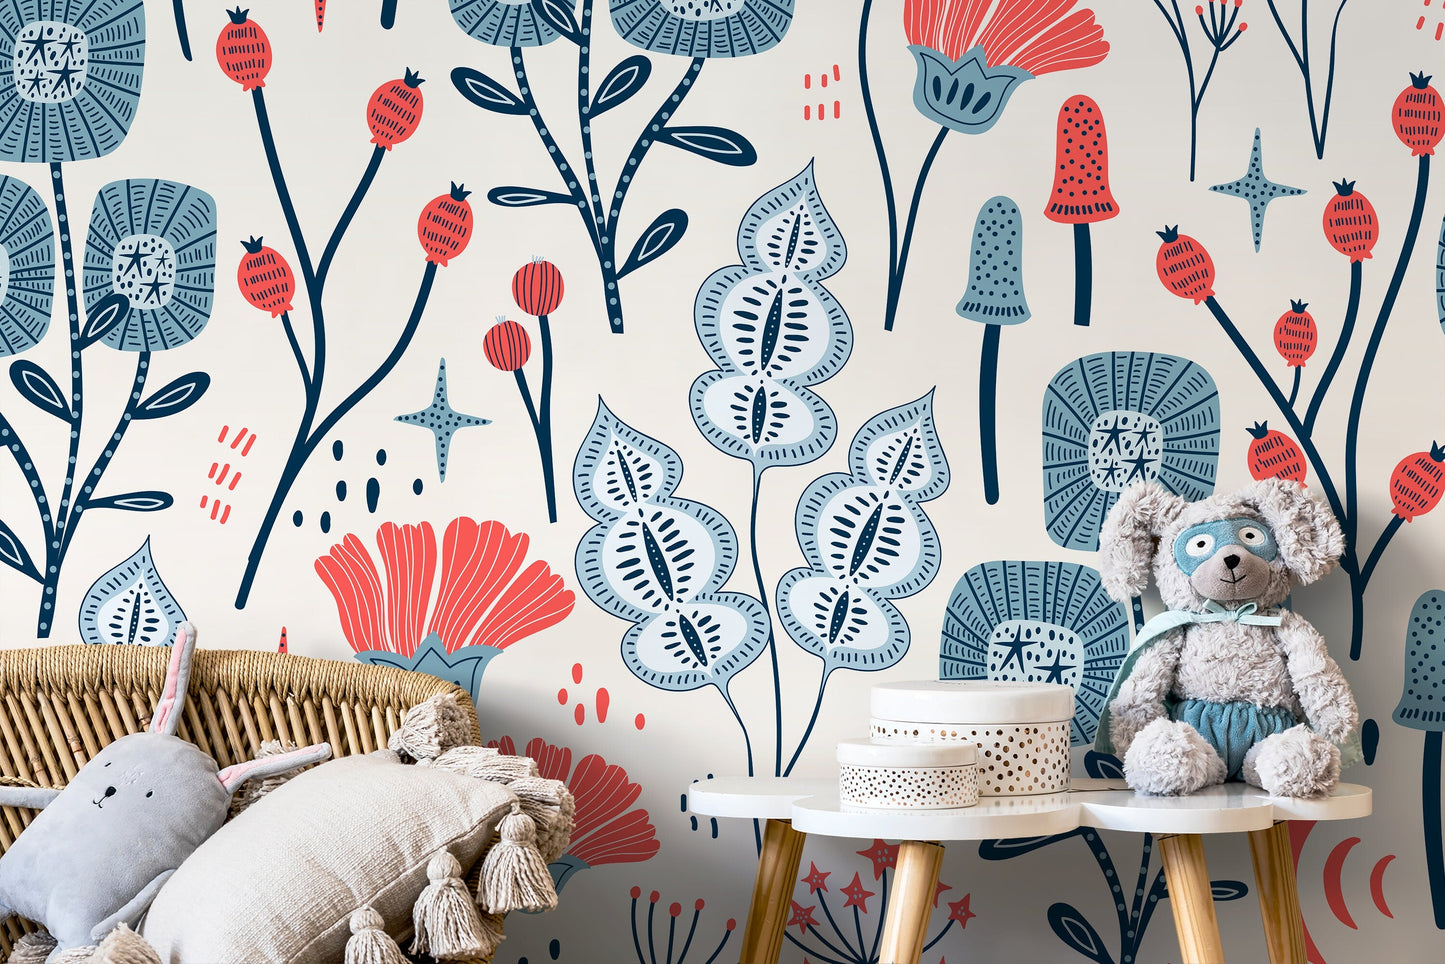 Blue and Red Floral Wallpaper / Peel and Stick Wallpaper Removable Wallpaper Home Decor Wall Art Wall Decor Room Decor - D396